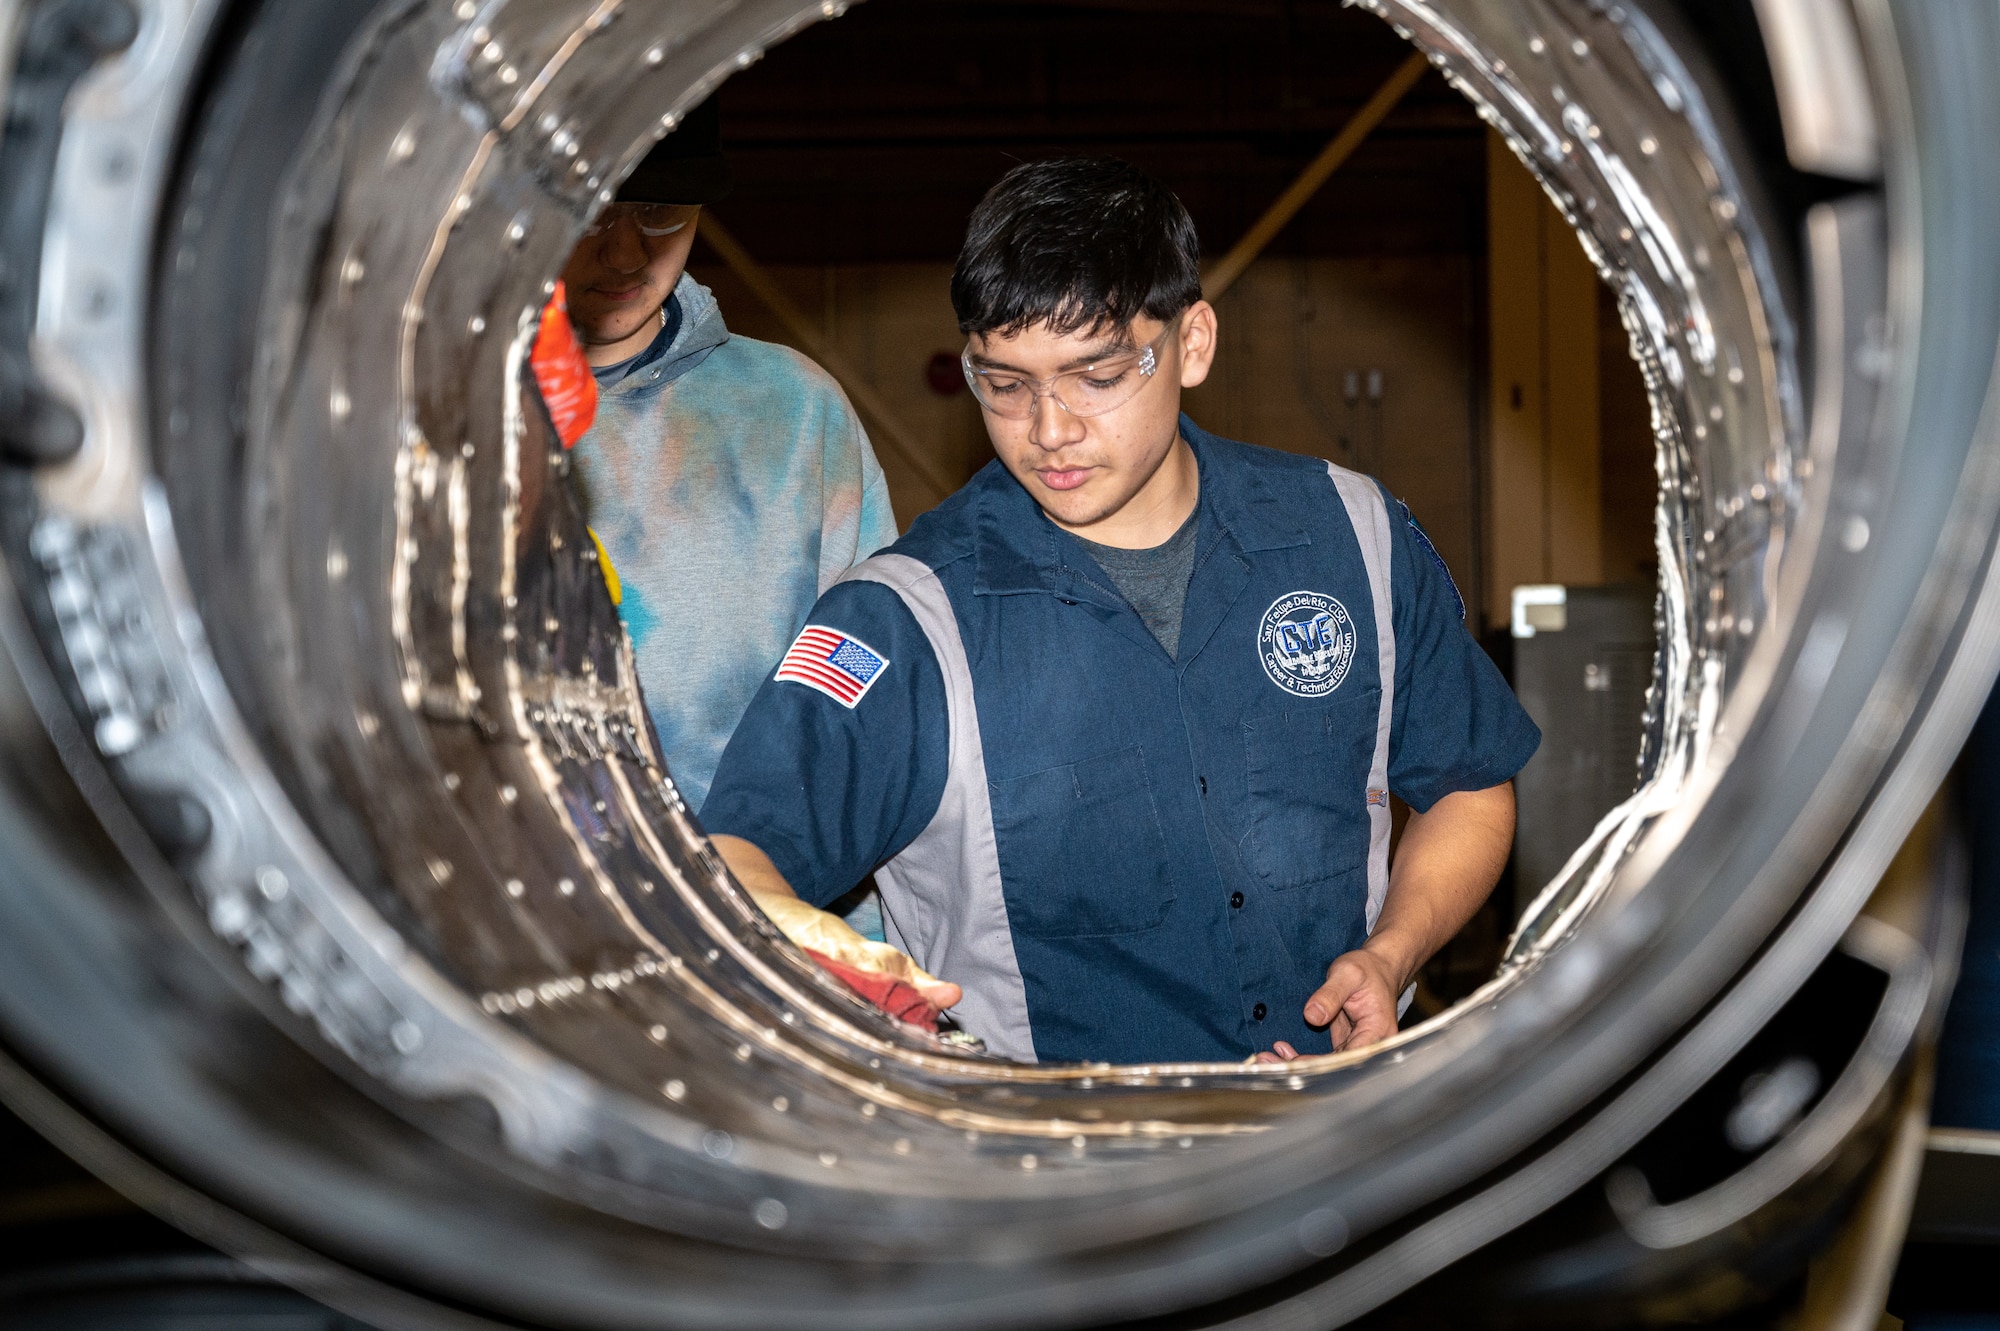 Adrian Garcia, a CTE Program Student, receives instruction from Laughlin Air Force Base, Texas, maintenance team while working on a T-38C Talon. The purpose of the Grow Our Own program is to give high school students experiences and tools to set them up for success in their adult lives. (U.S. Air Force photo by Senior Airman David Phaff)